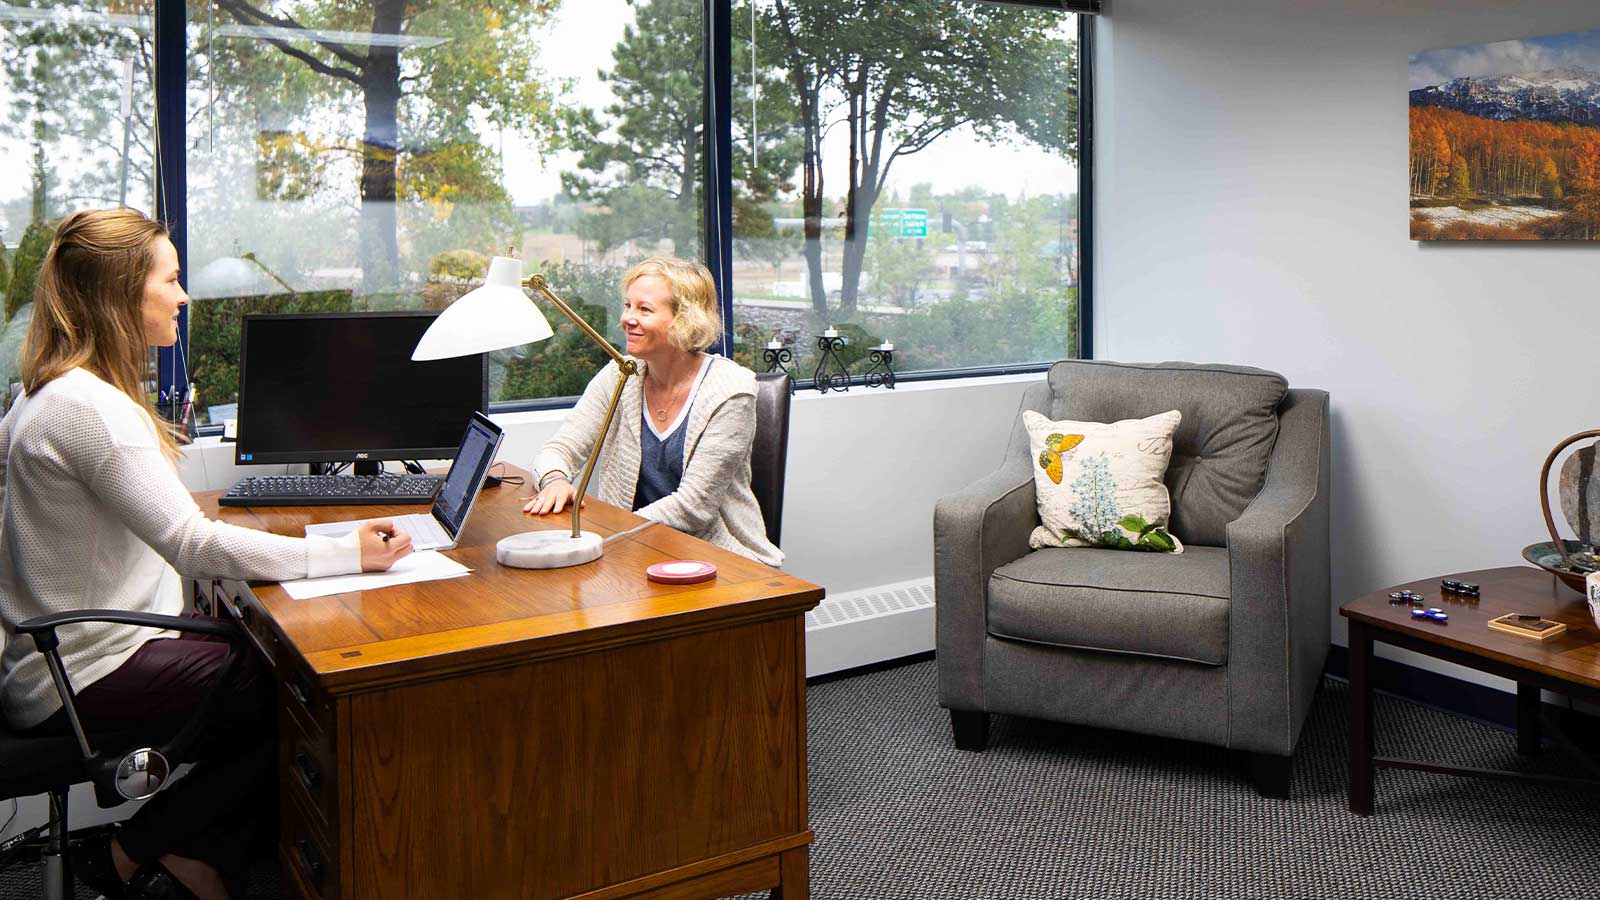 Two women talking in an office space with a wooden desk, computer, comfortable chairs, and nature views.